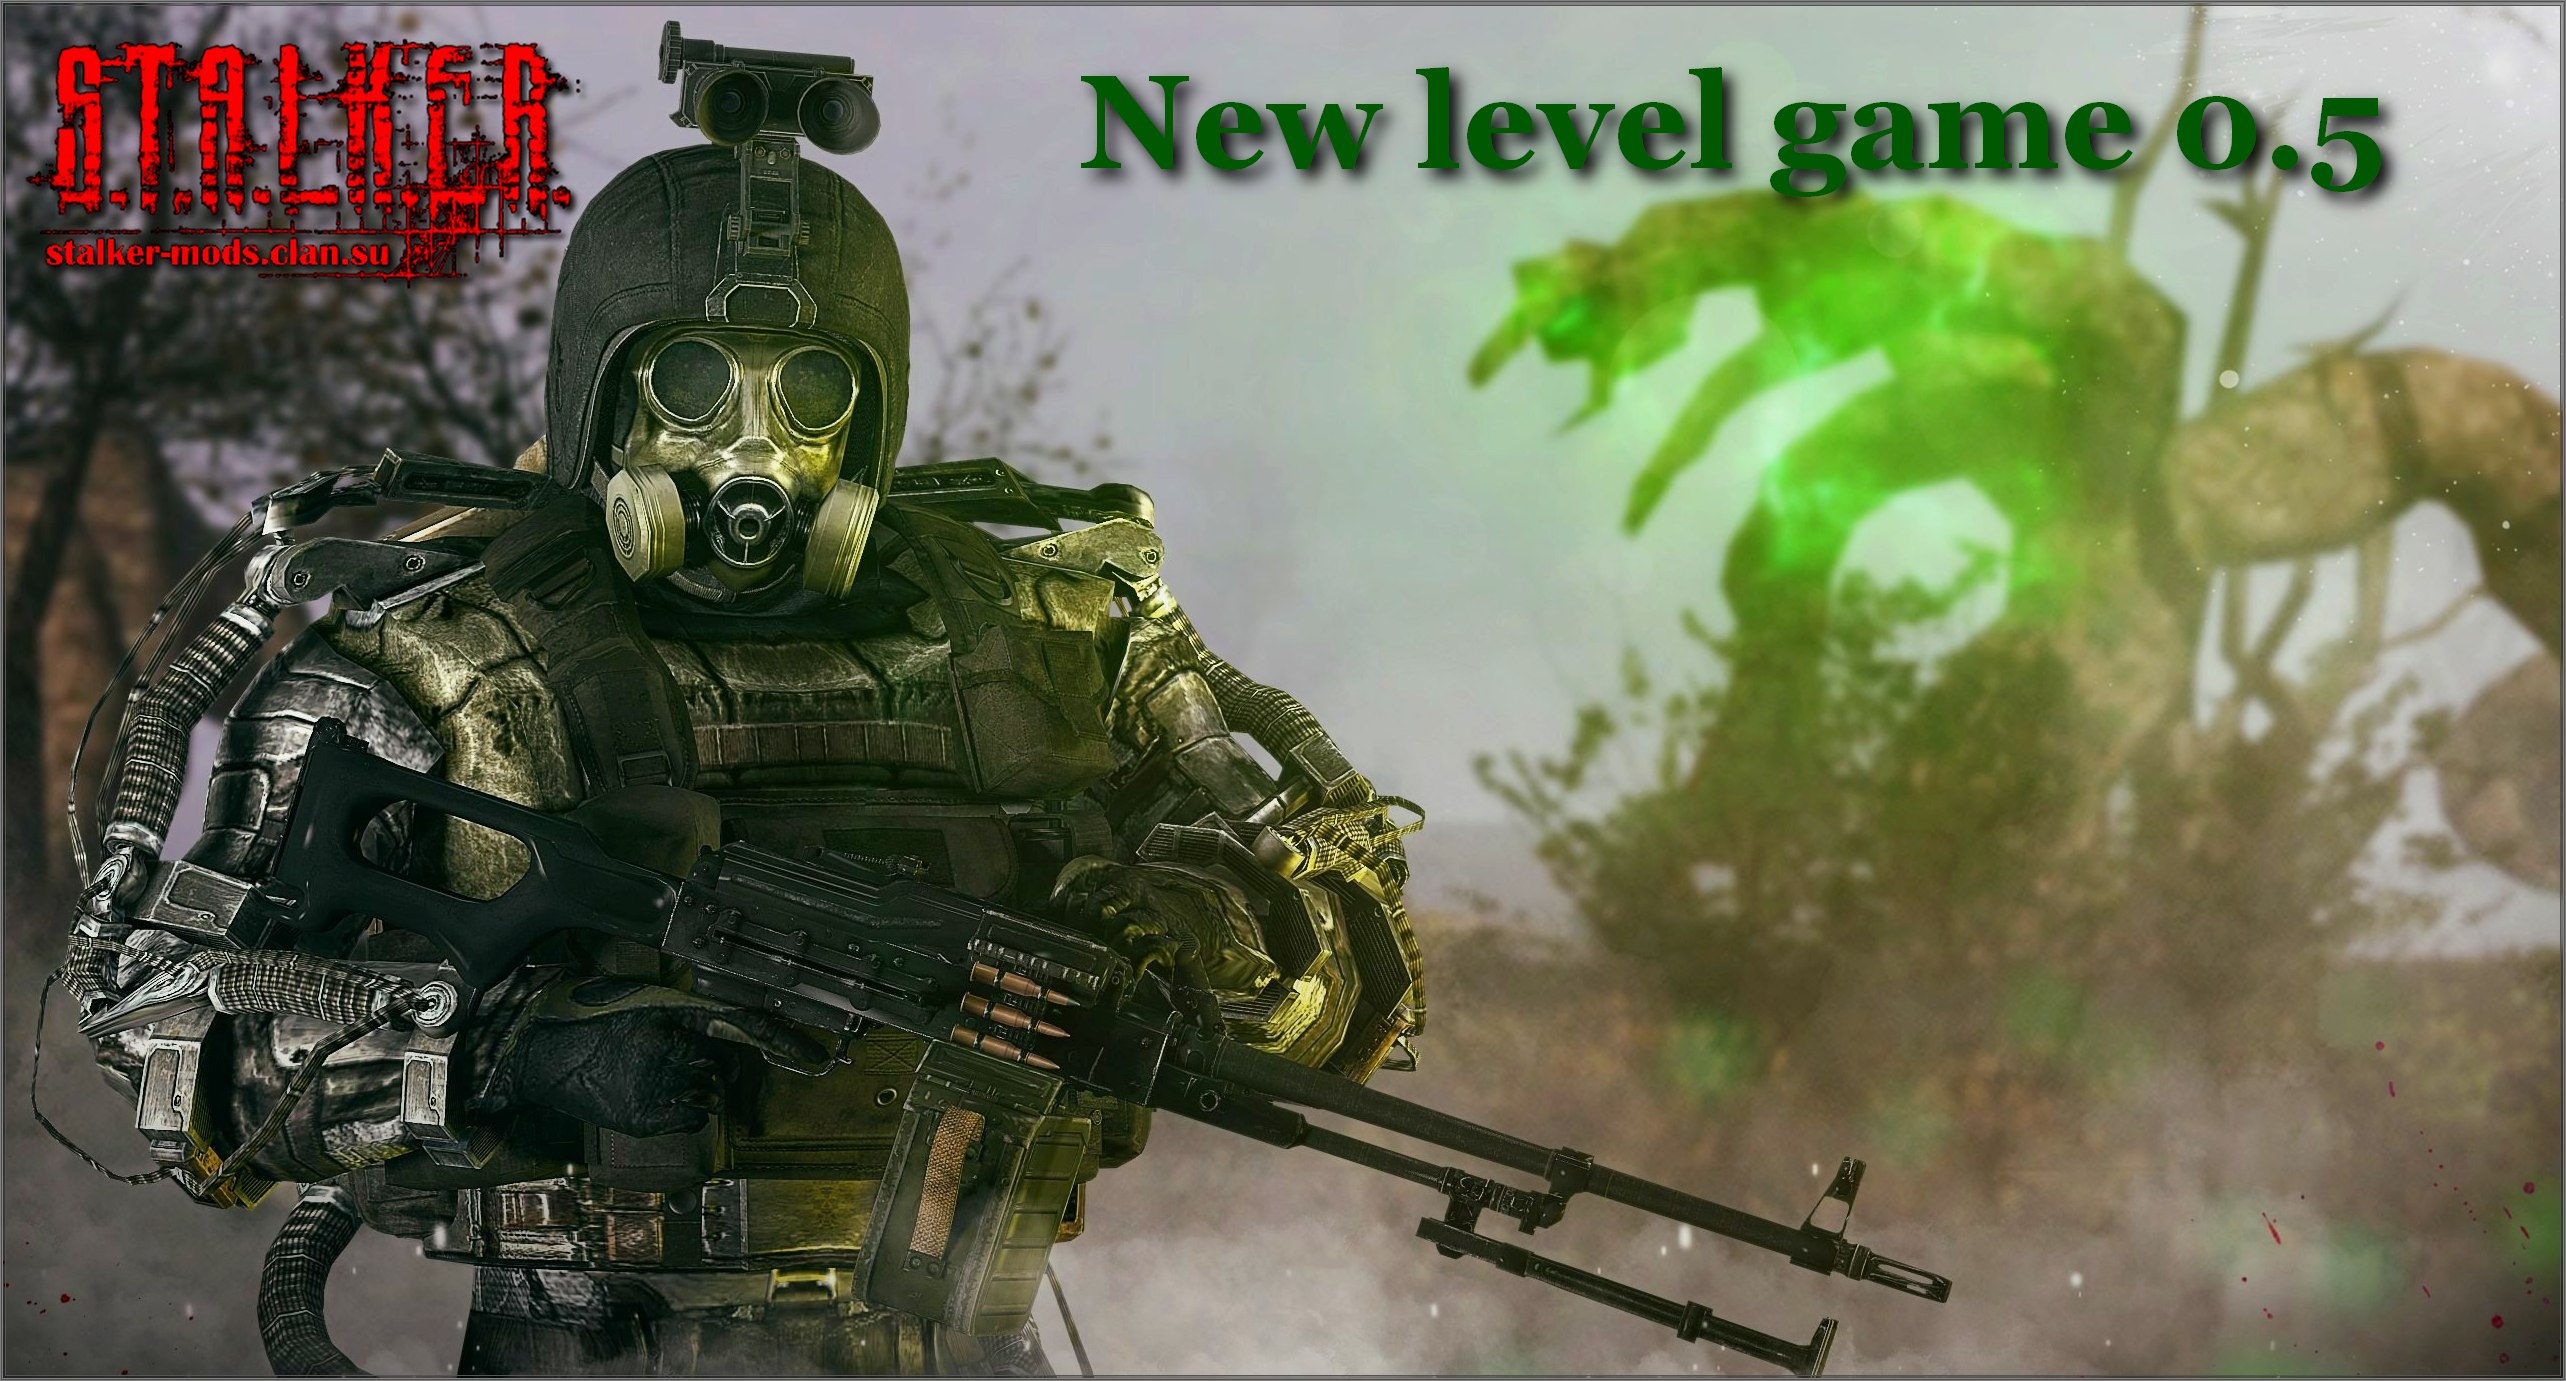 New level game 0.5